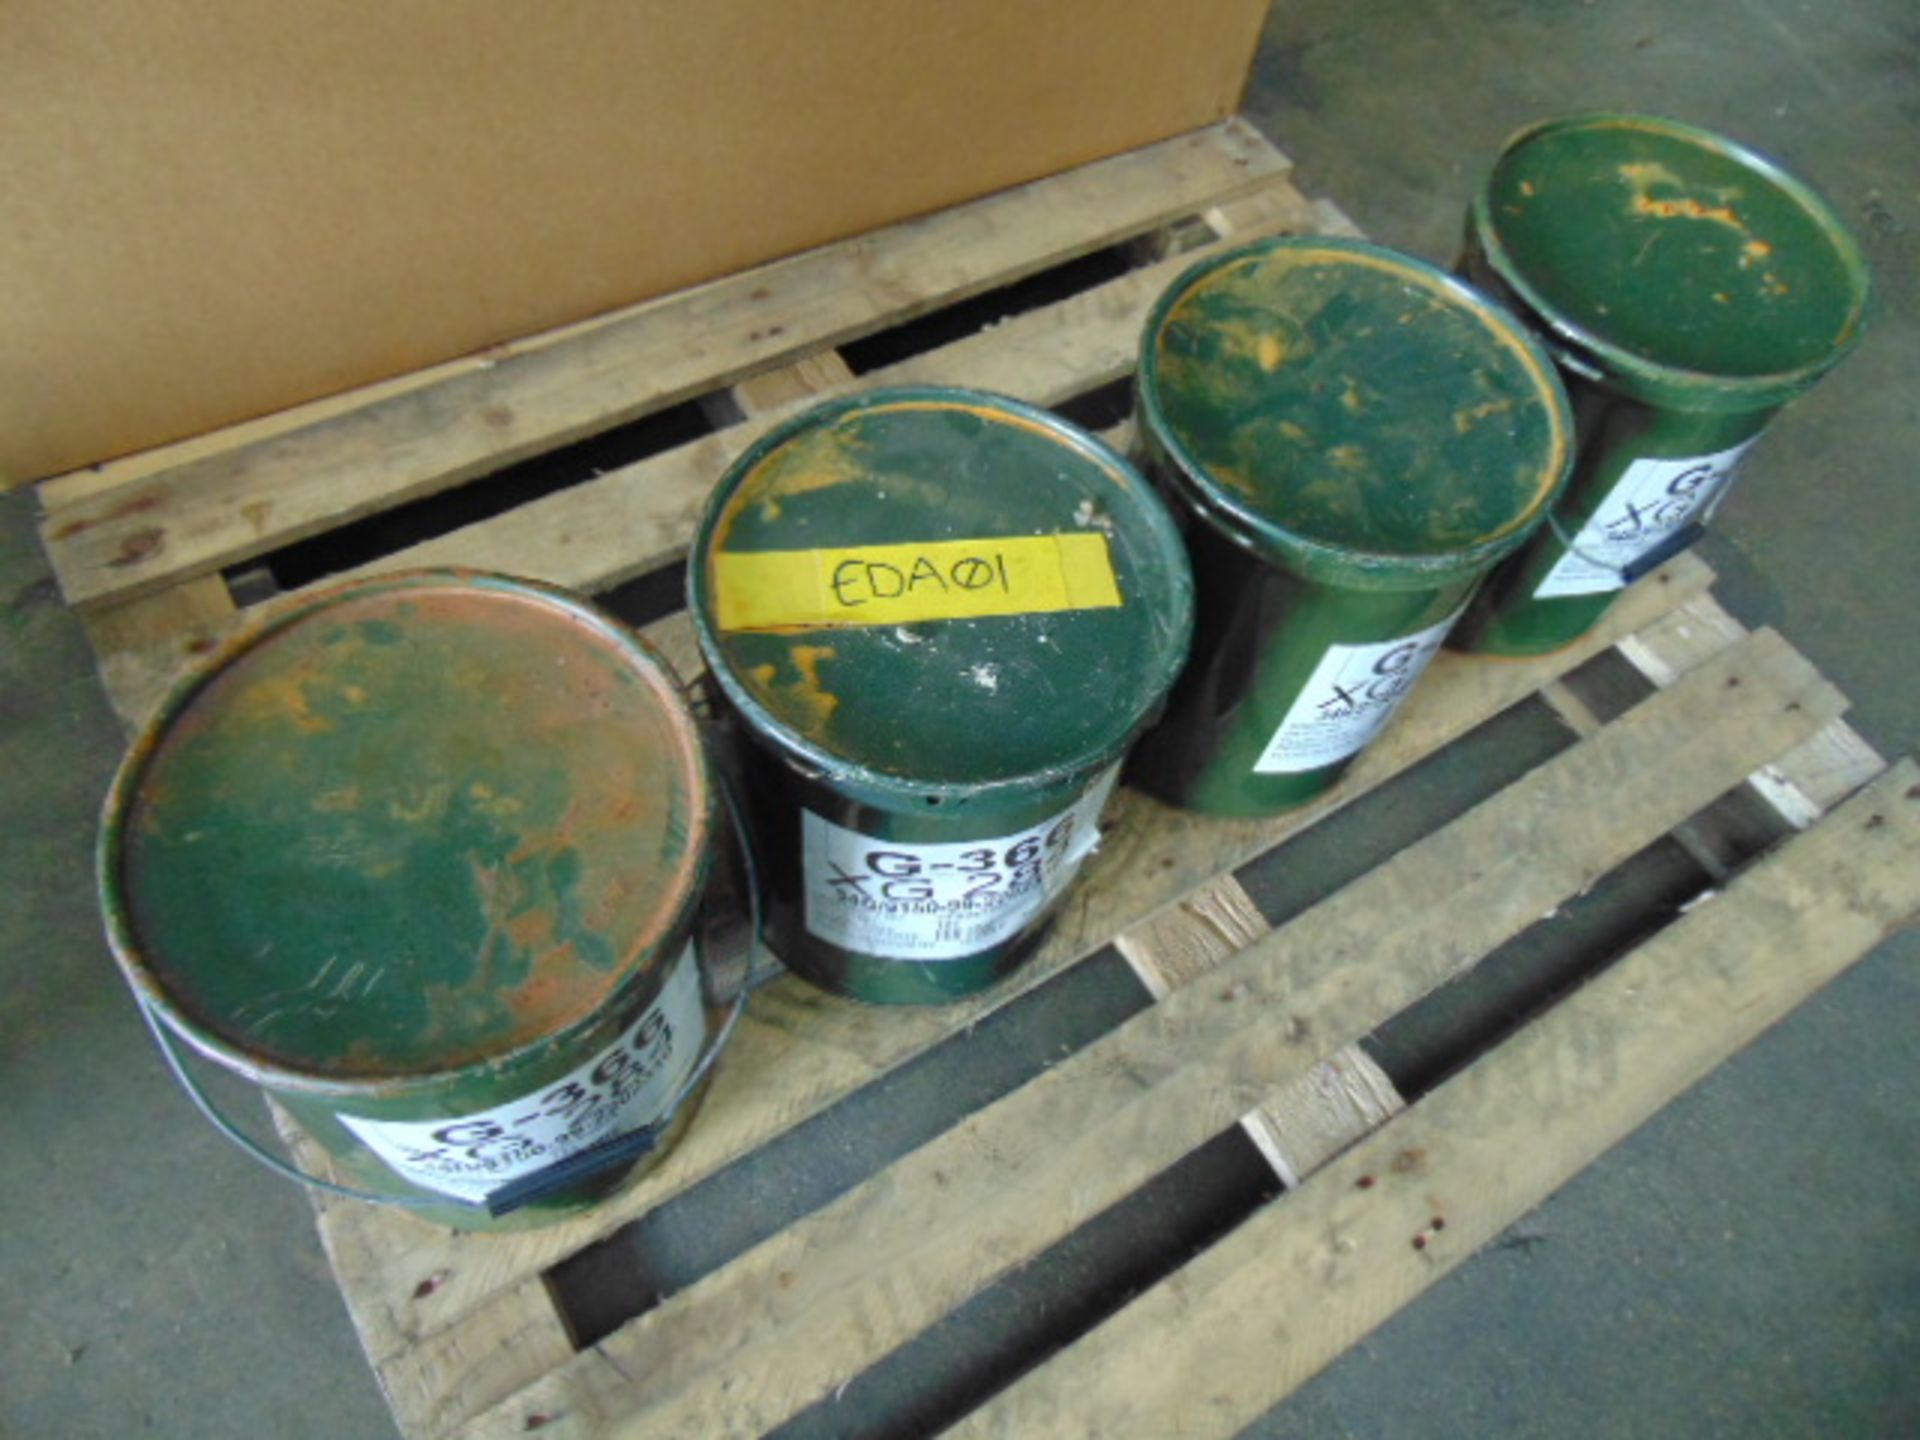 4 x Unissued 12.5Kg Tins of XG-284 G-366 Grease - Image 4 of 4